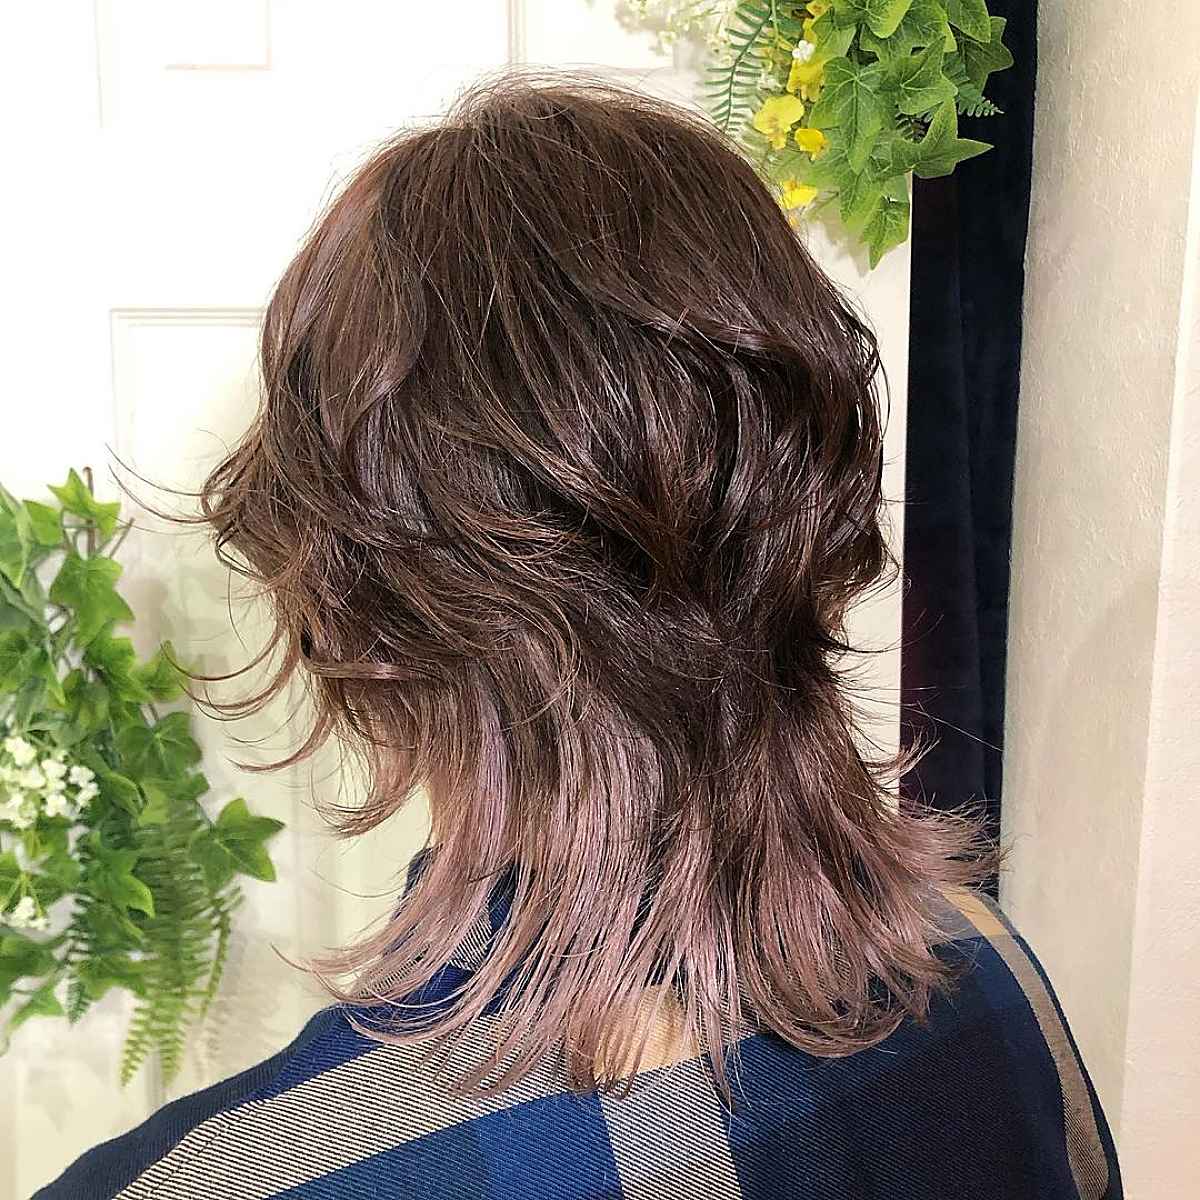 Octopus Cut with Short Tousled Layers